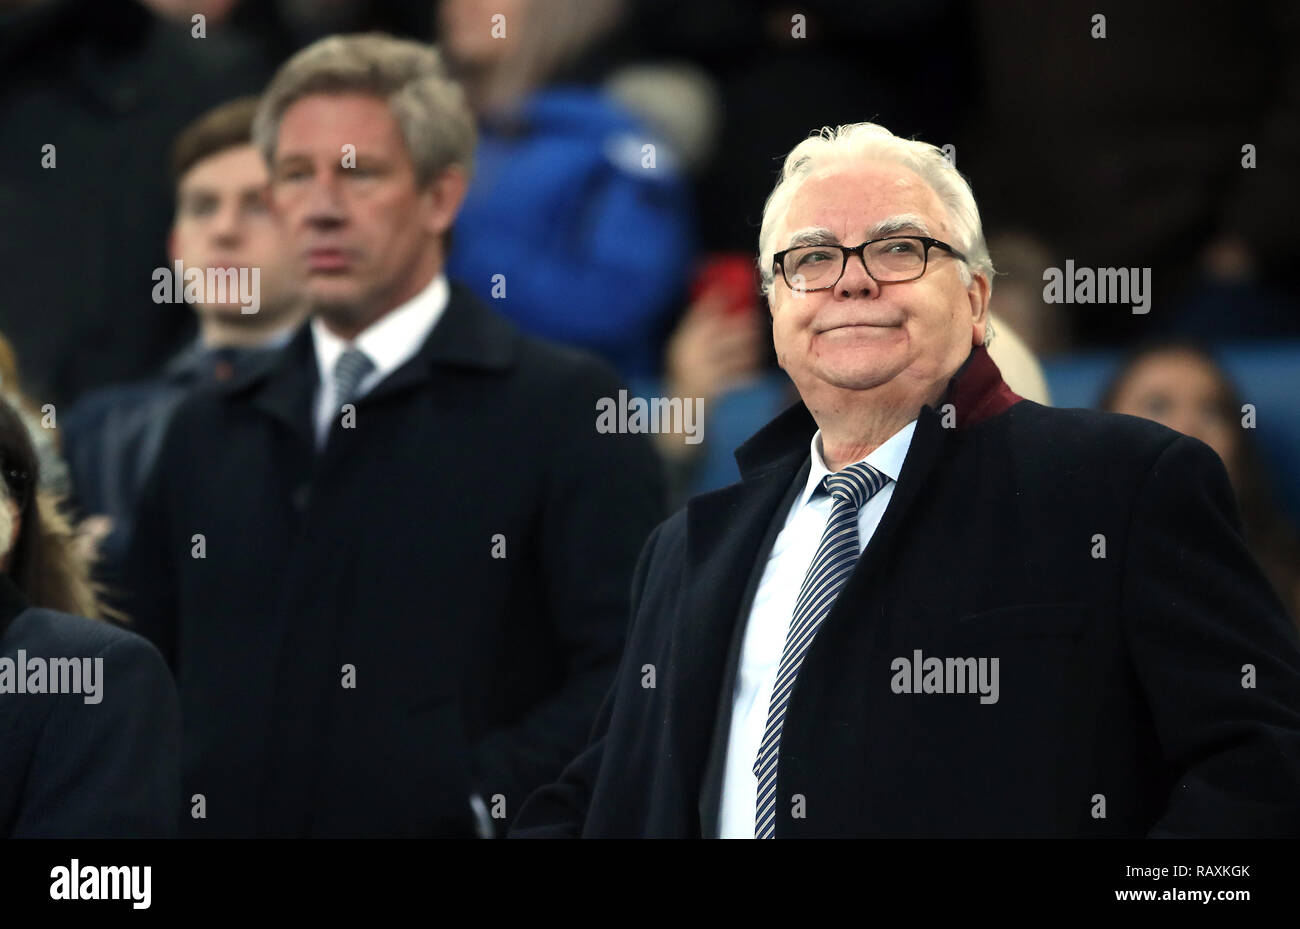 Everton chairman Bill Kenwright (right) and director of football Marcel Brans (left) during the Emirates FA Cup, third round match at Goodison Park, Liverpool. Stock Photo